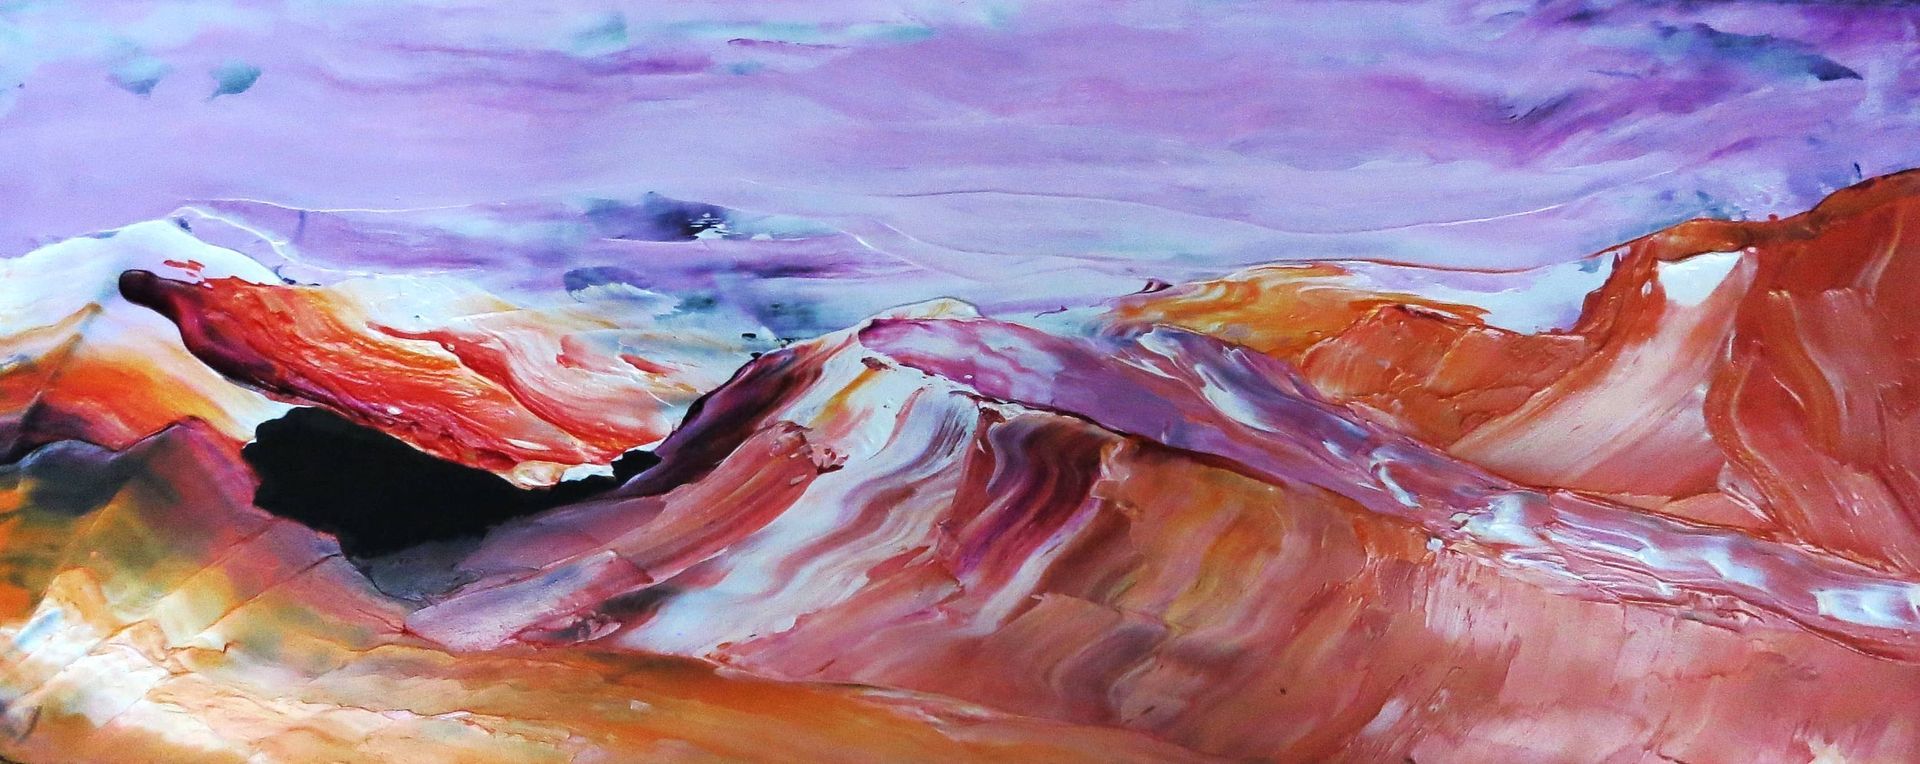 Fire Mountain is an Oil on Masonite 11 in. x 4 in. By my third collection I was moving into interpreting landscapes and using vibrant colours. The rich oranges, reds and purple gave life and structure to the mountain range.